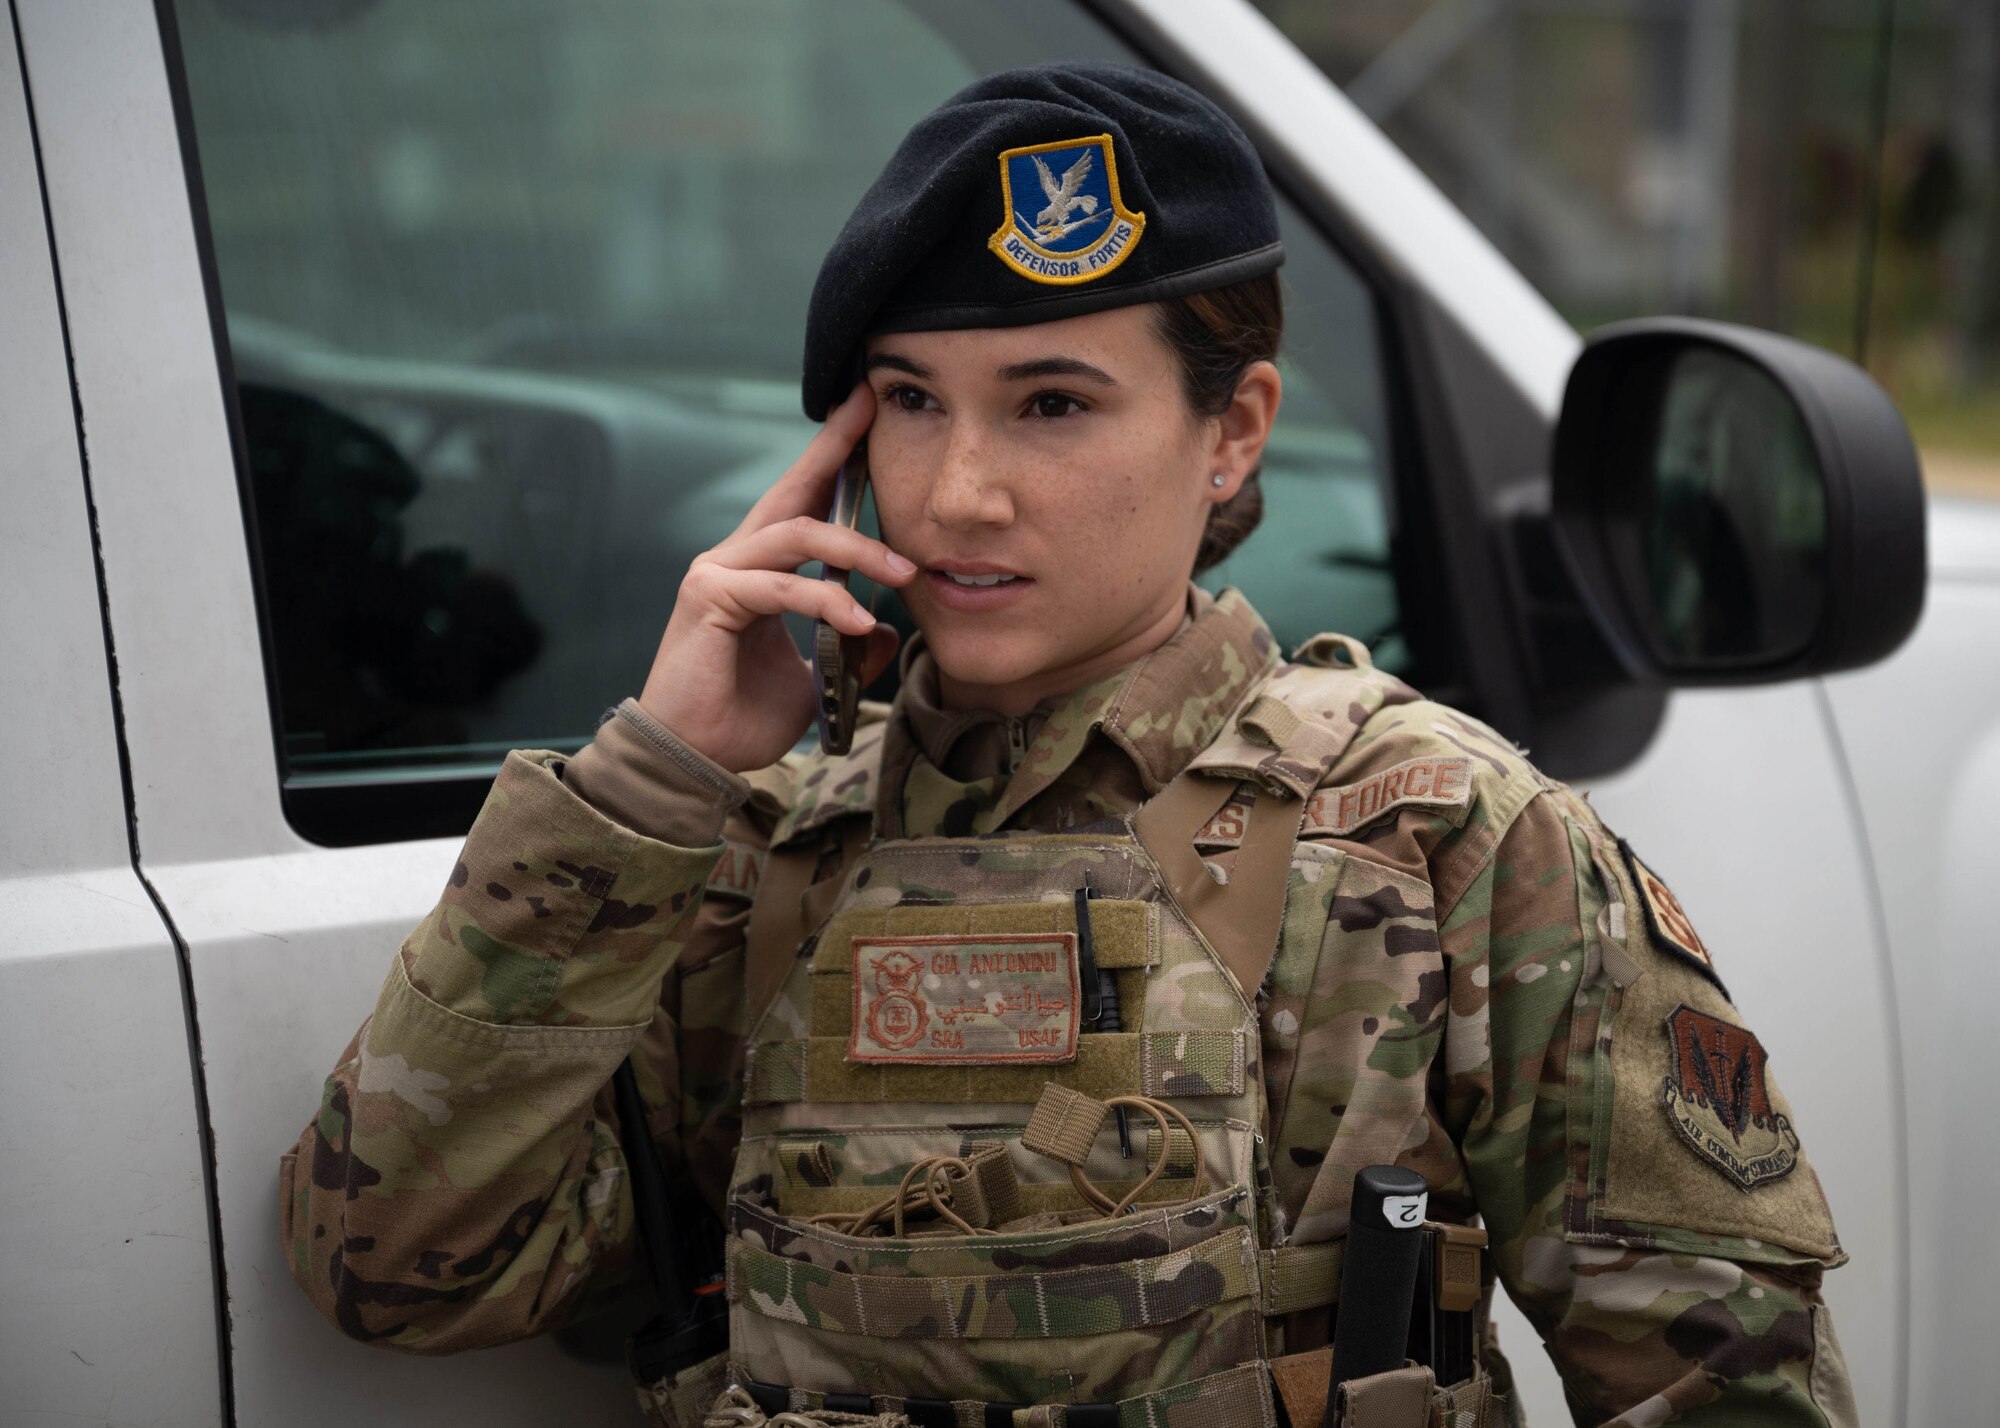 Security Forces Airman receives phone call on duty